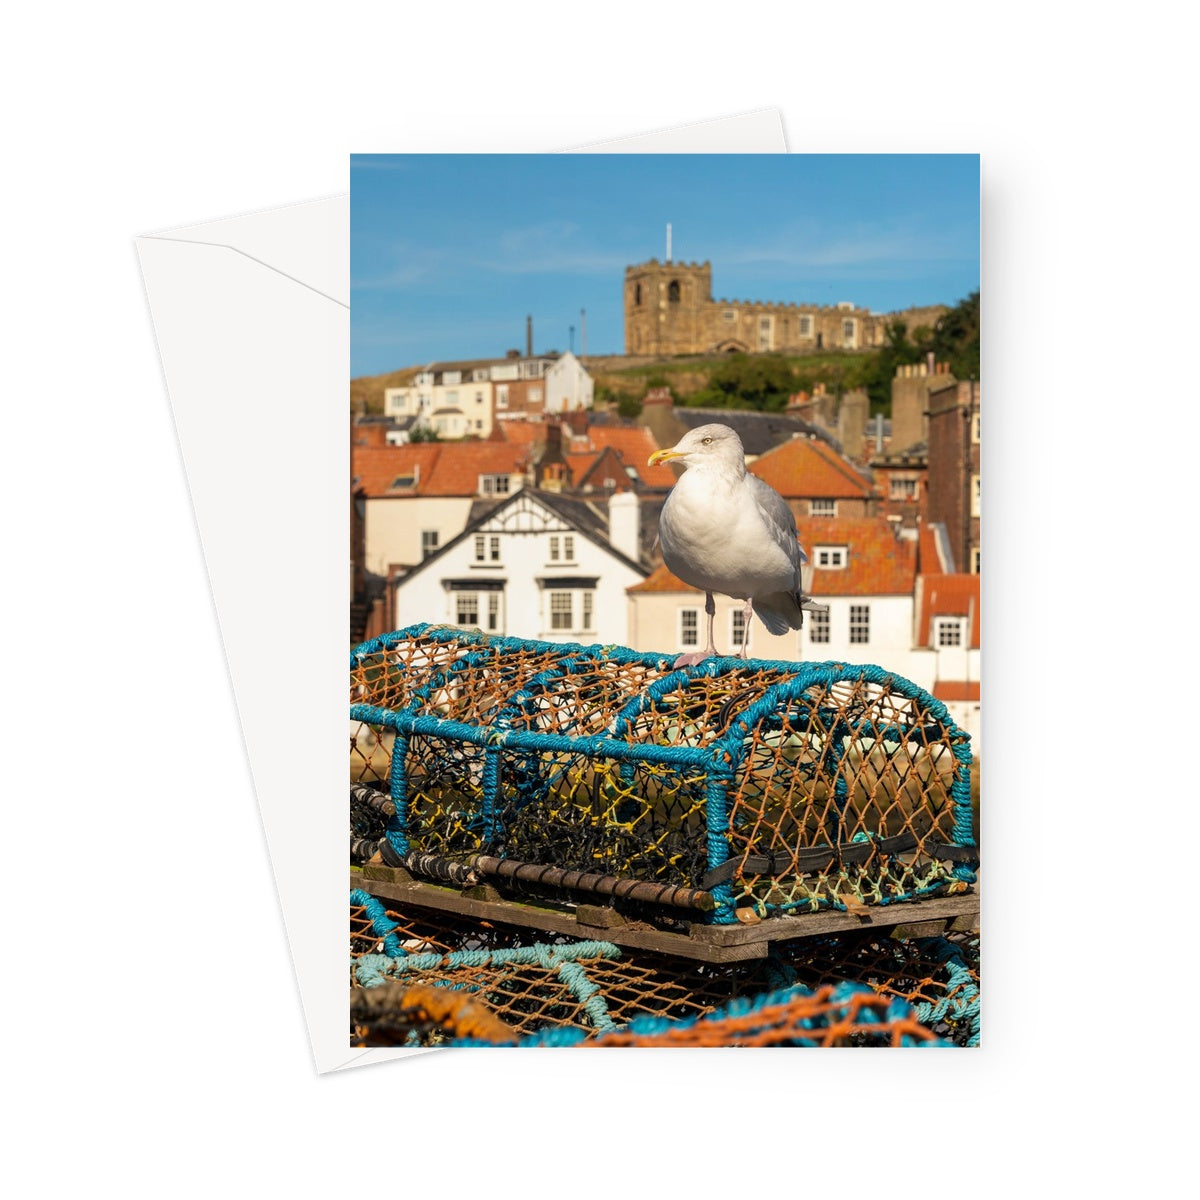 Seagull standing on a lobster trap on the quayside of Whitby harbour with St Mary's church in the distance. Whitby, UK. Greeting Card